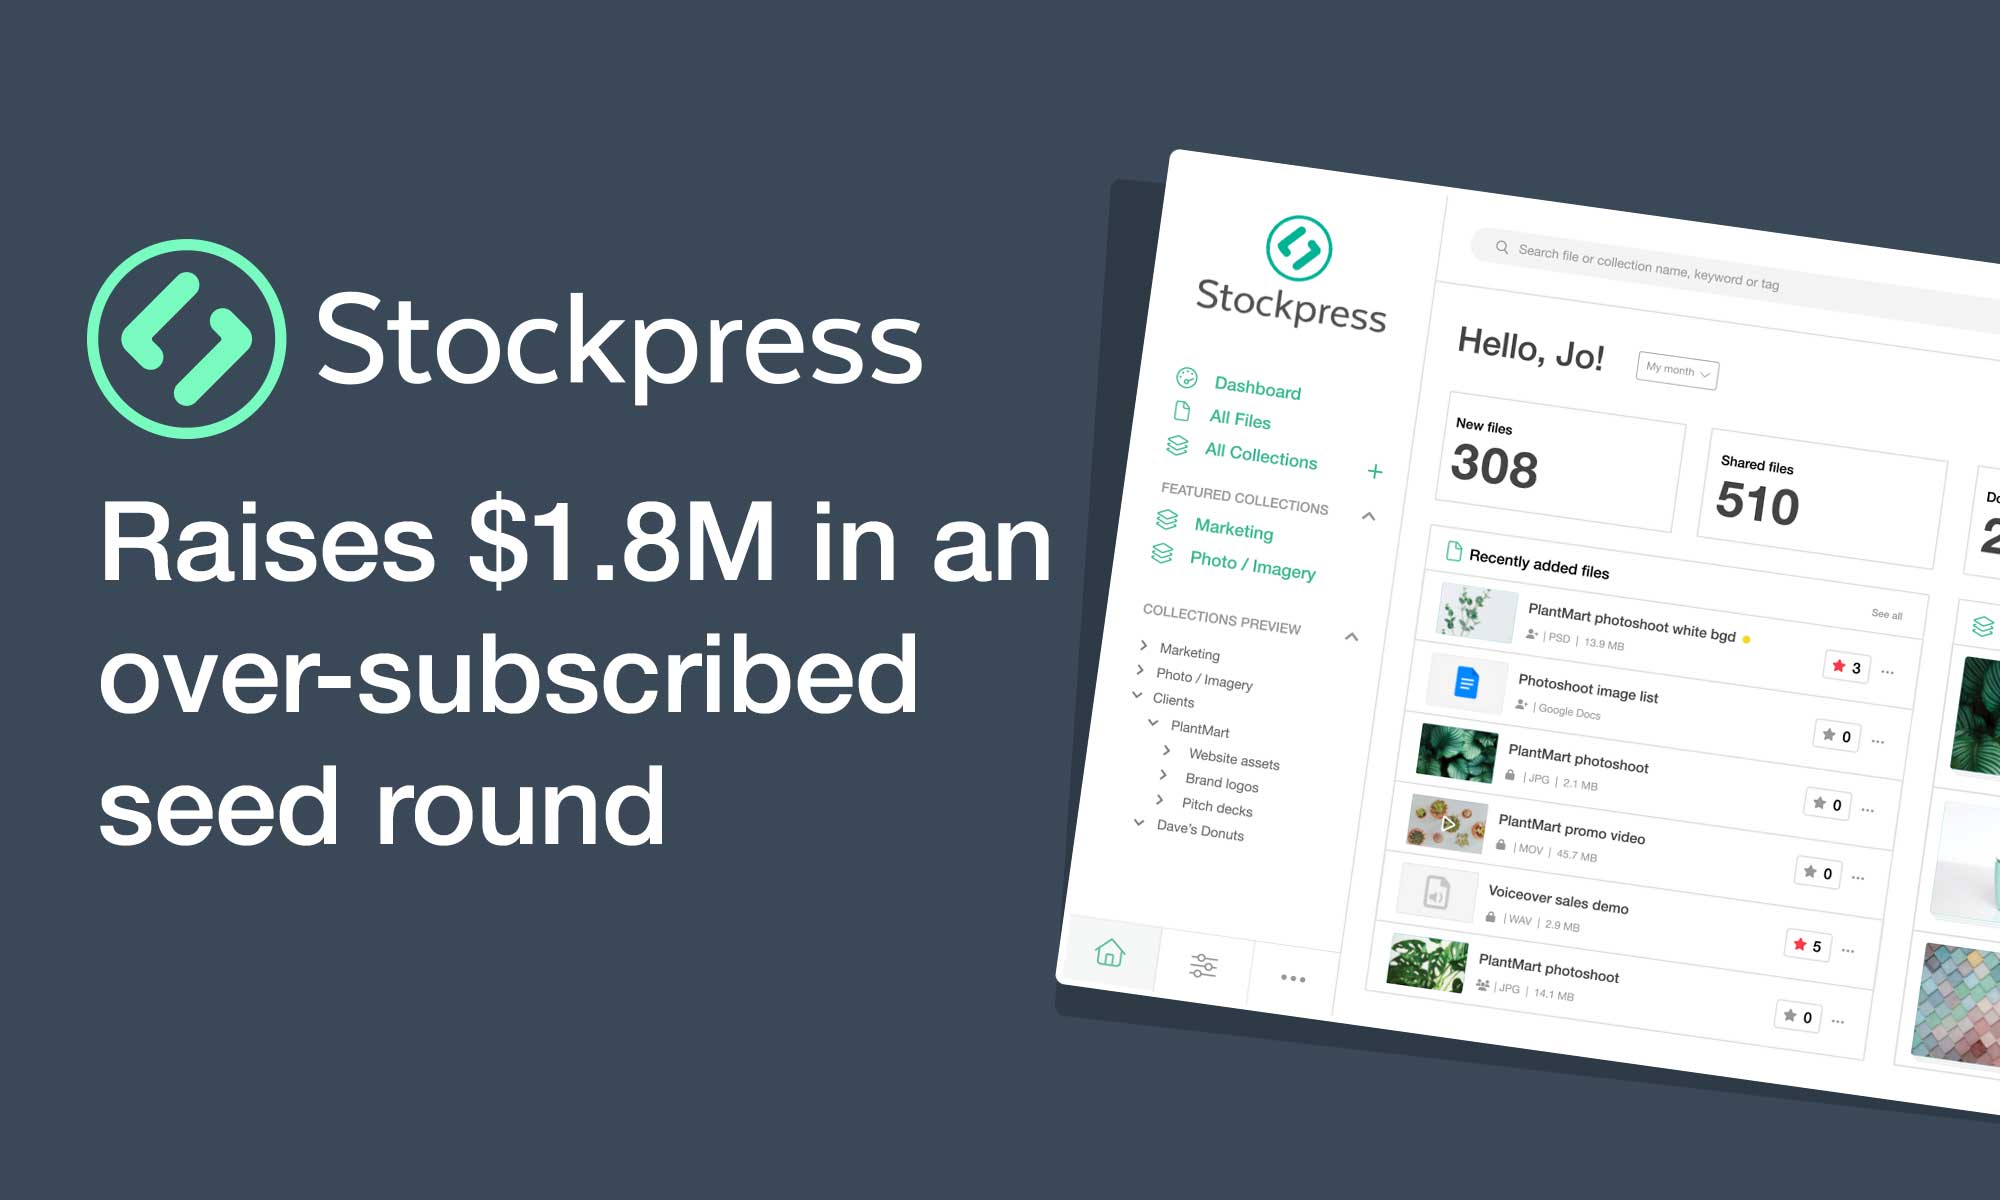 Stockpress raises 1.8M in an oversubscribed seed round